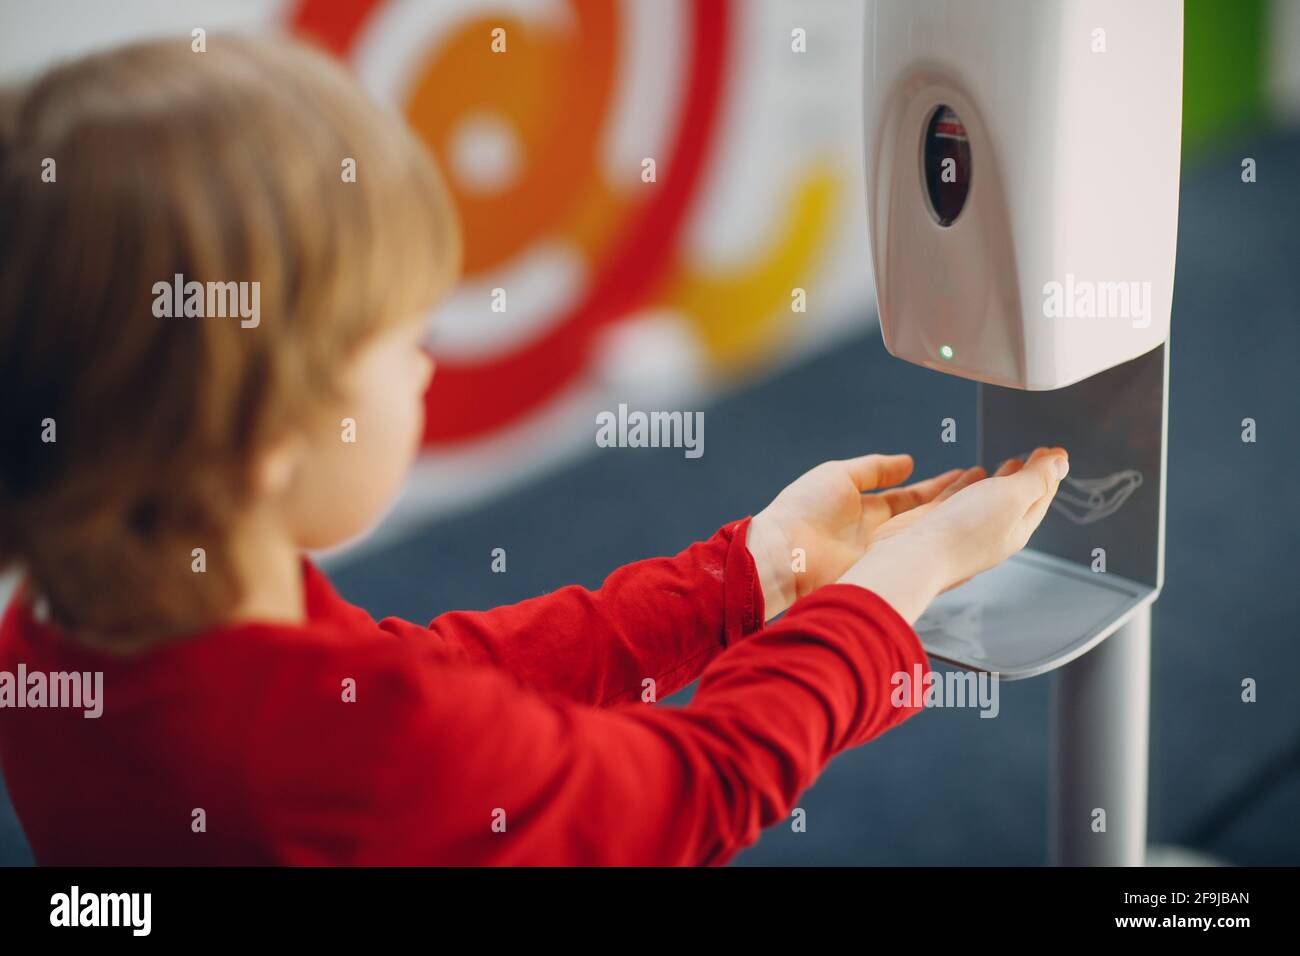 Child boy kid using automatic alcohol gel dispenser spraying on hands sanitizer machine antiseptic disinfectant, new normal life after Coronavirus COVID-19 pandemia. Stock Photo